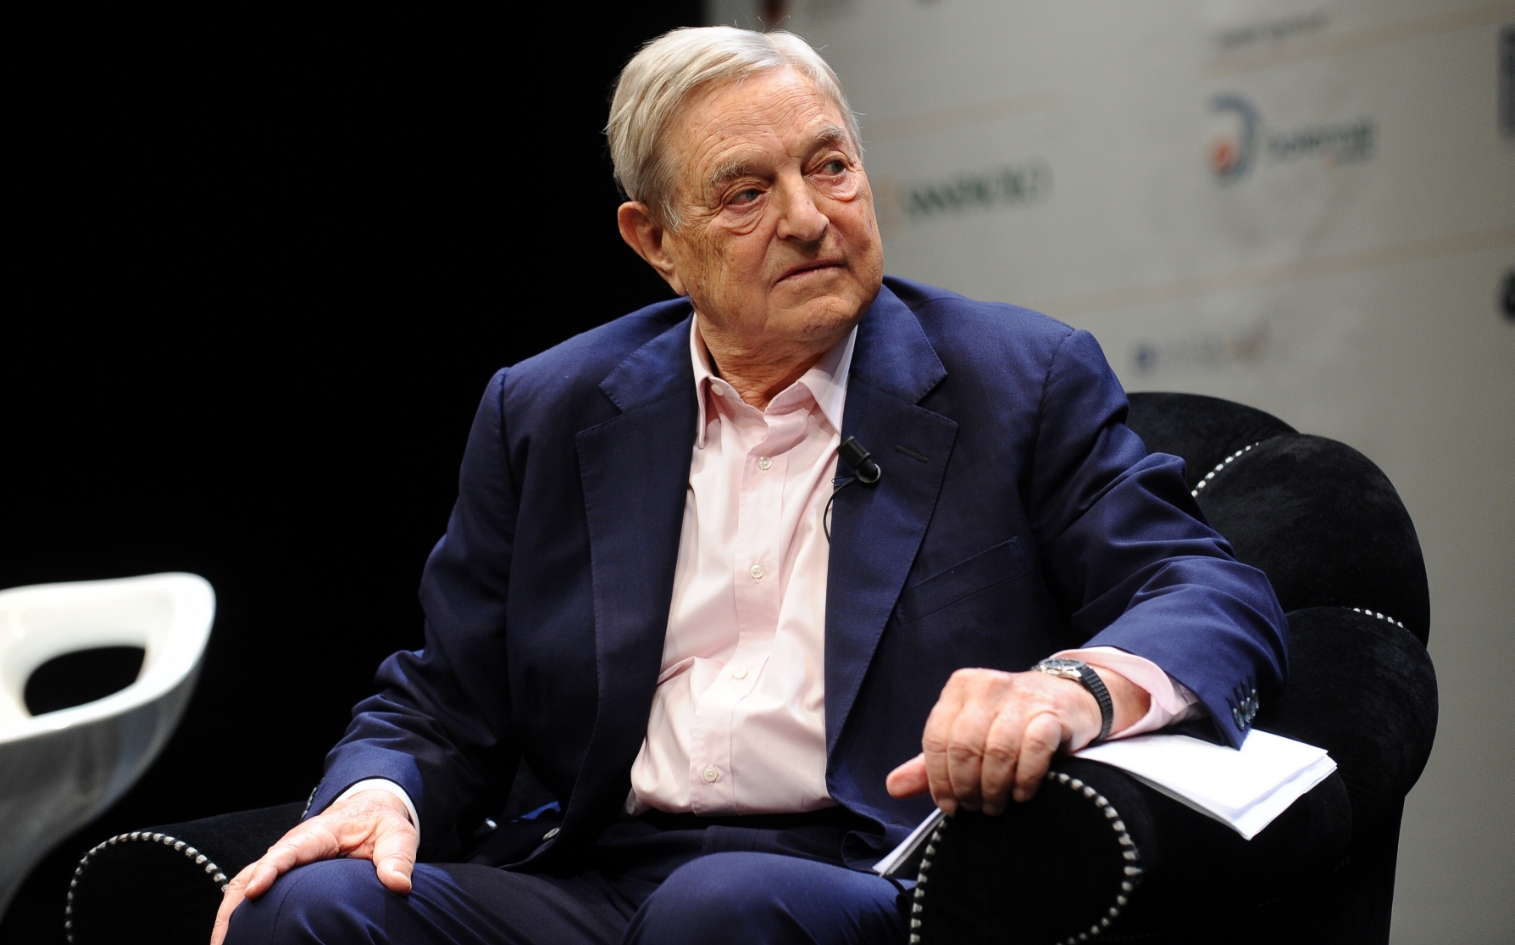 Image: Meddling globalist George Soros named as the puppet master behind student gun control push